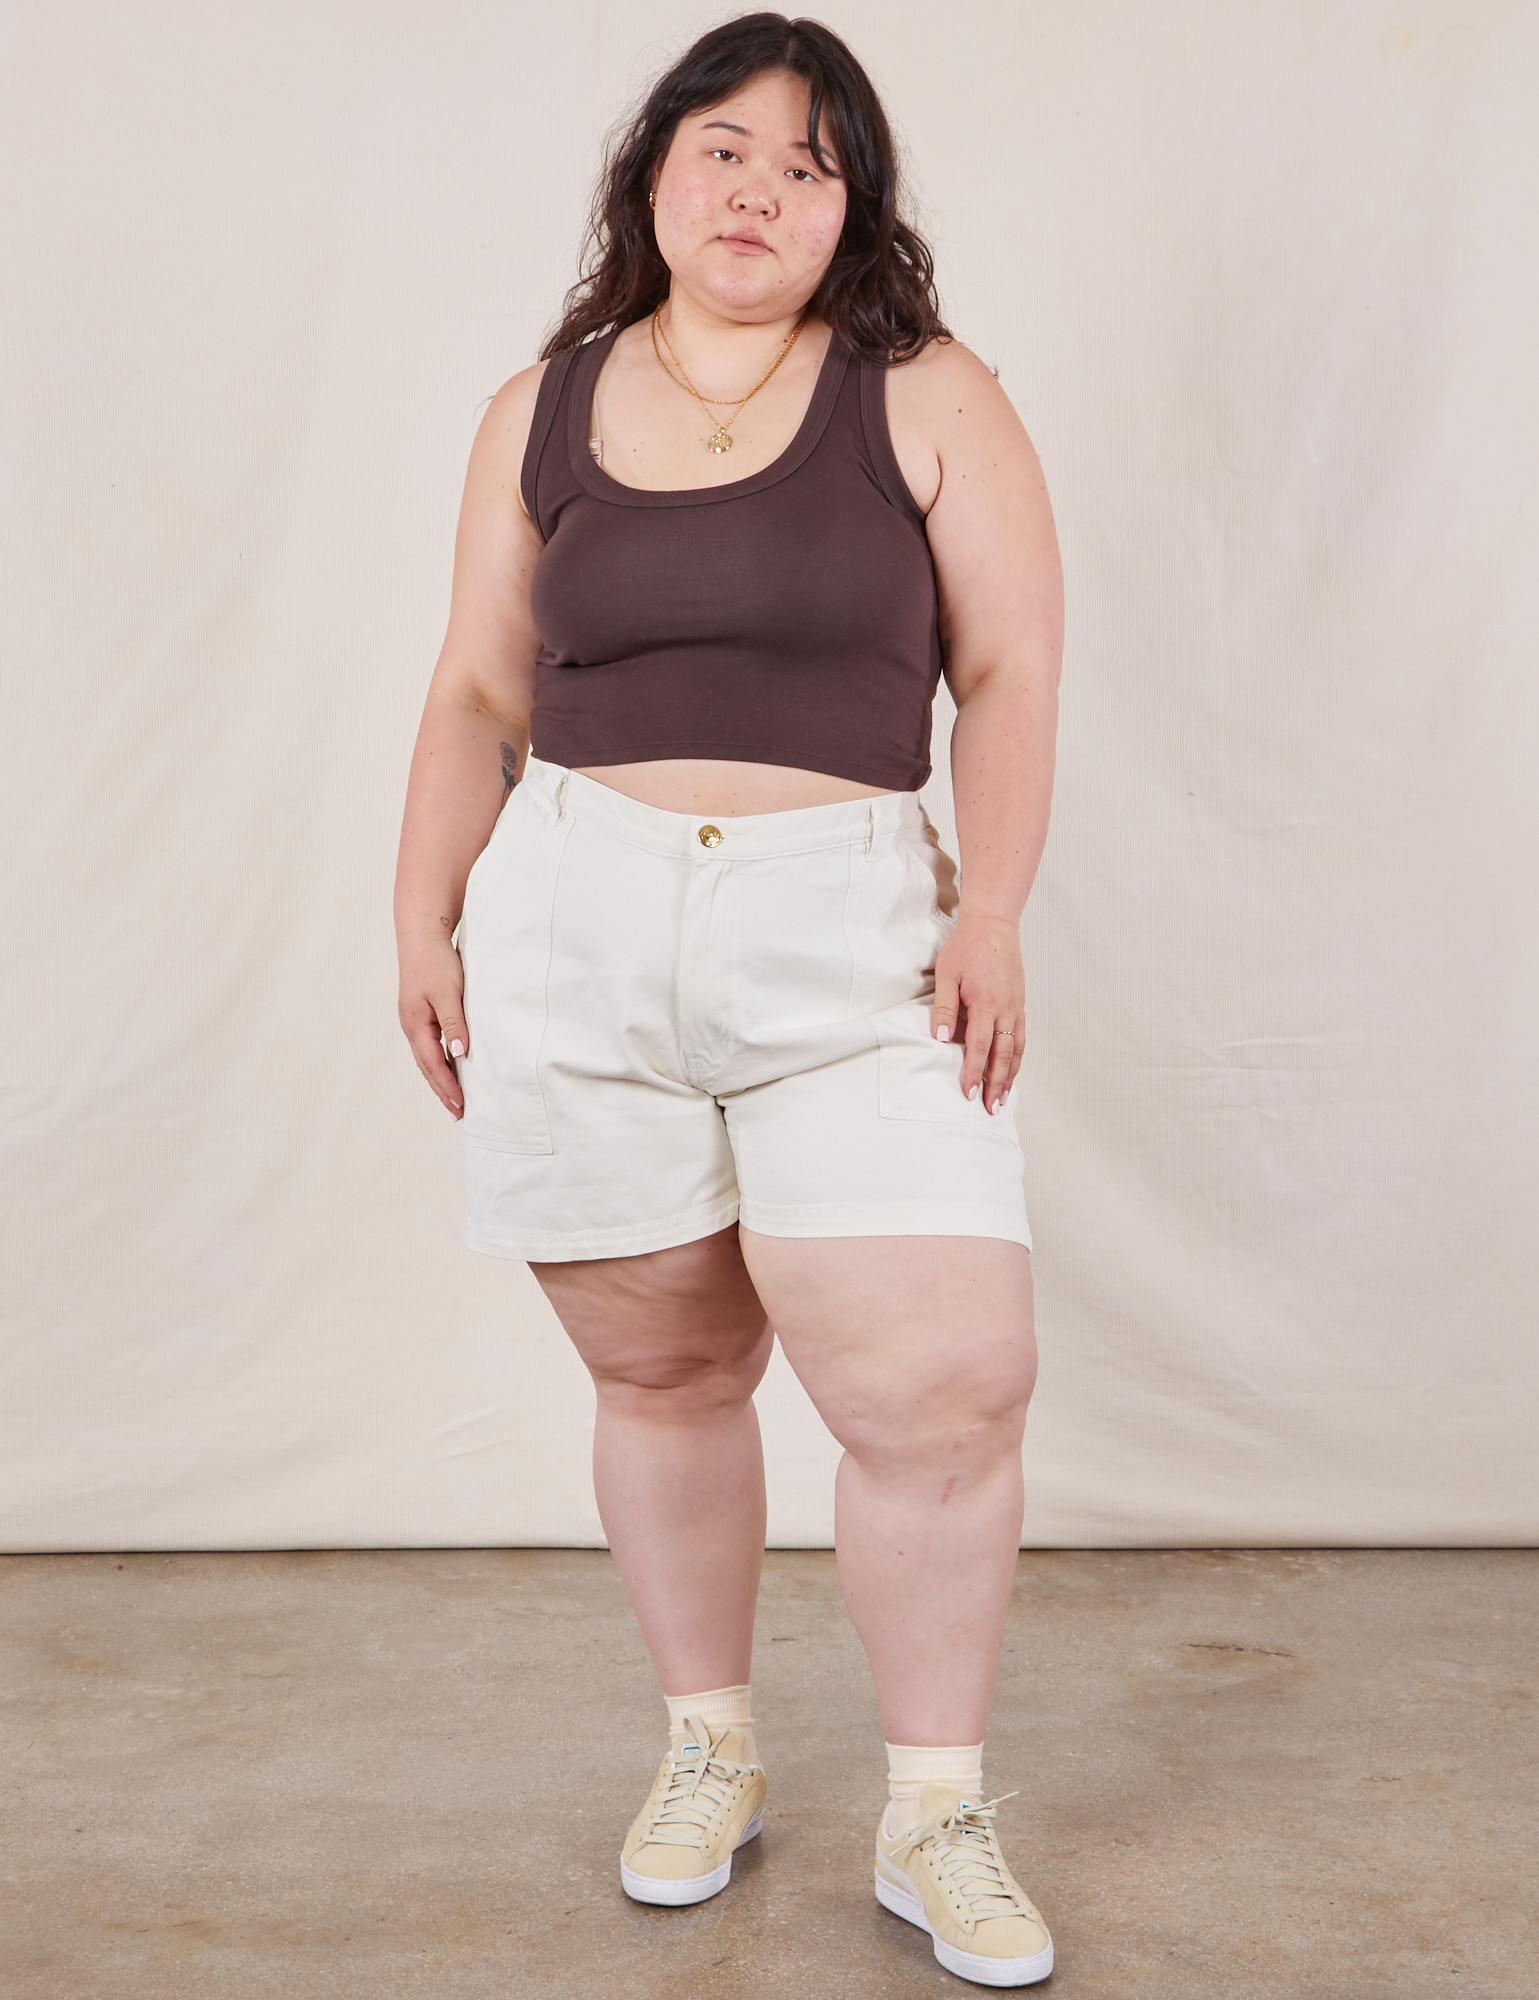 Ashley is 5’7” and wearing 1XL Classic Work Shorts in Vintage Tee Off-White paired with espresso brown Cropped Tank Top